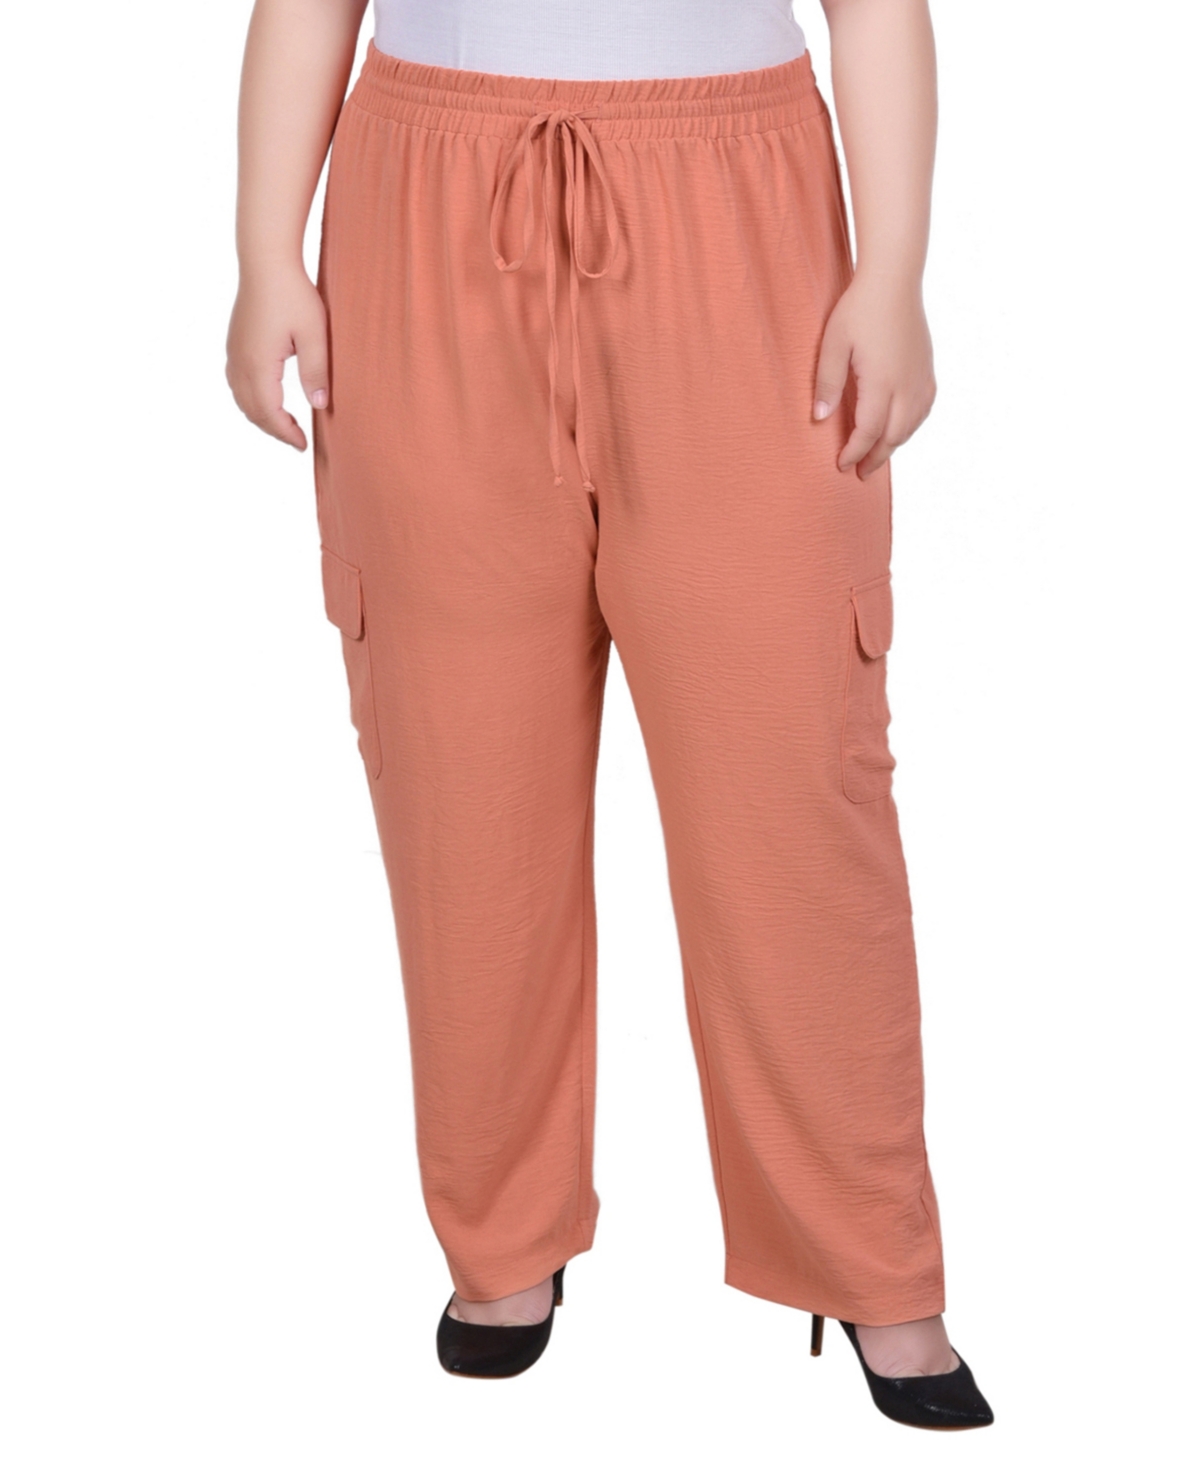 NY COLLECTION PLUS SIZE LONG PULL ON CARGO PANTS